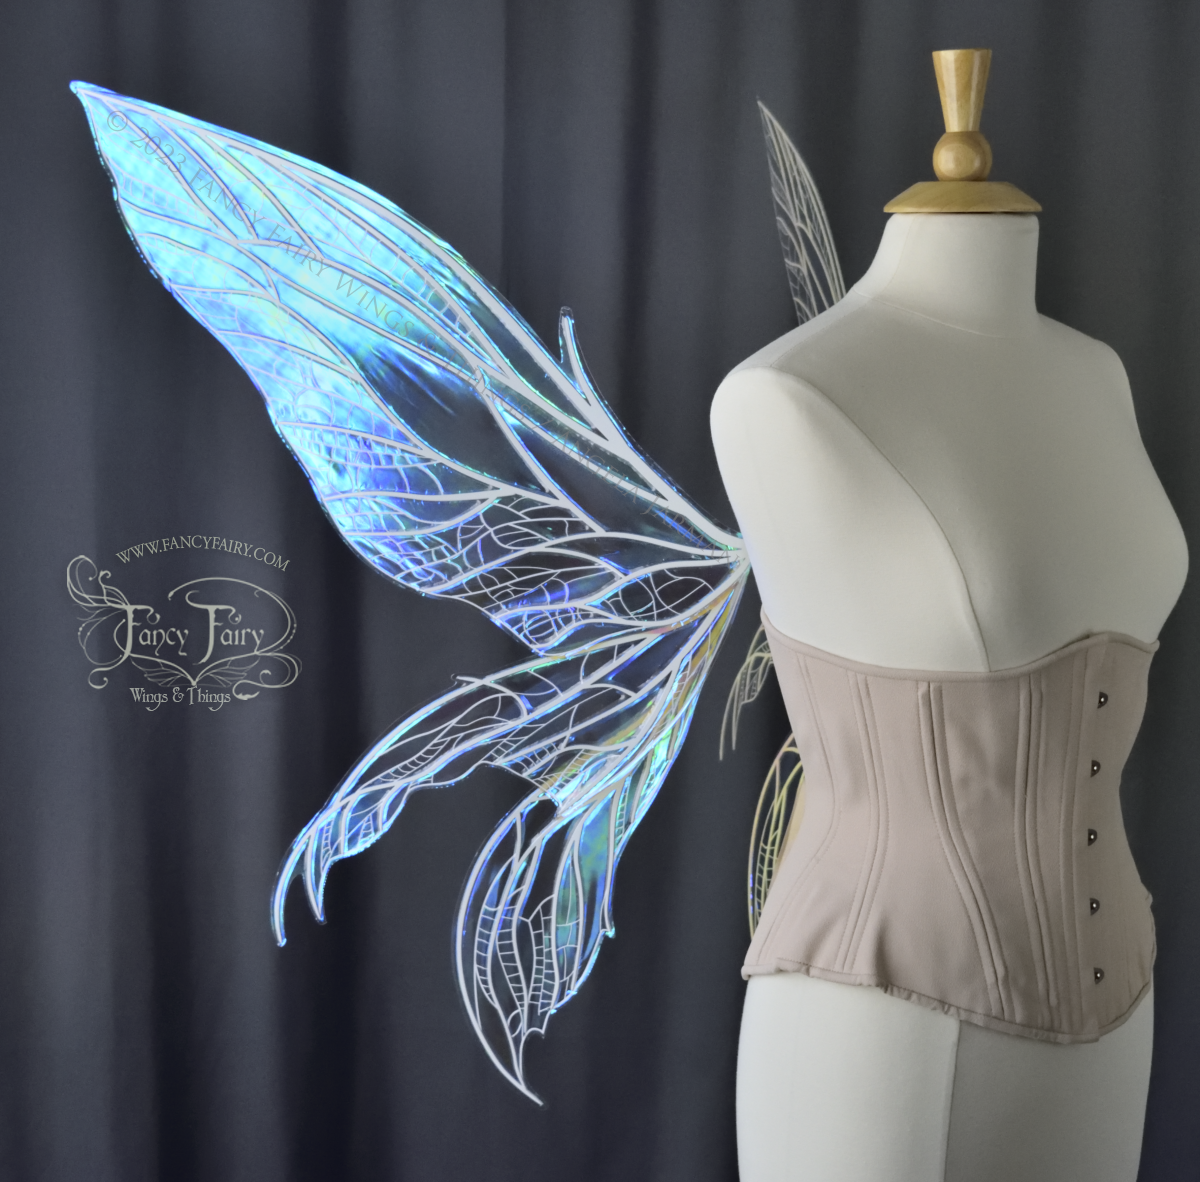 Side Left view of an ivory dress form wearing an underbust corset and large blue/teal/violet iridescent fairy wings. Upper panels are elongated with pointed tips, 2 lower panels curve downward, detailed white veins, standing against a dark grey background